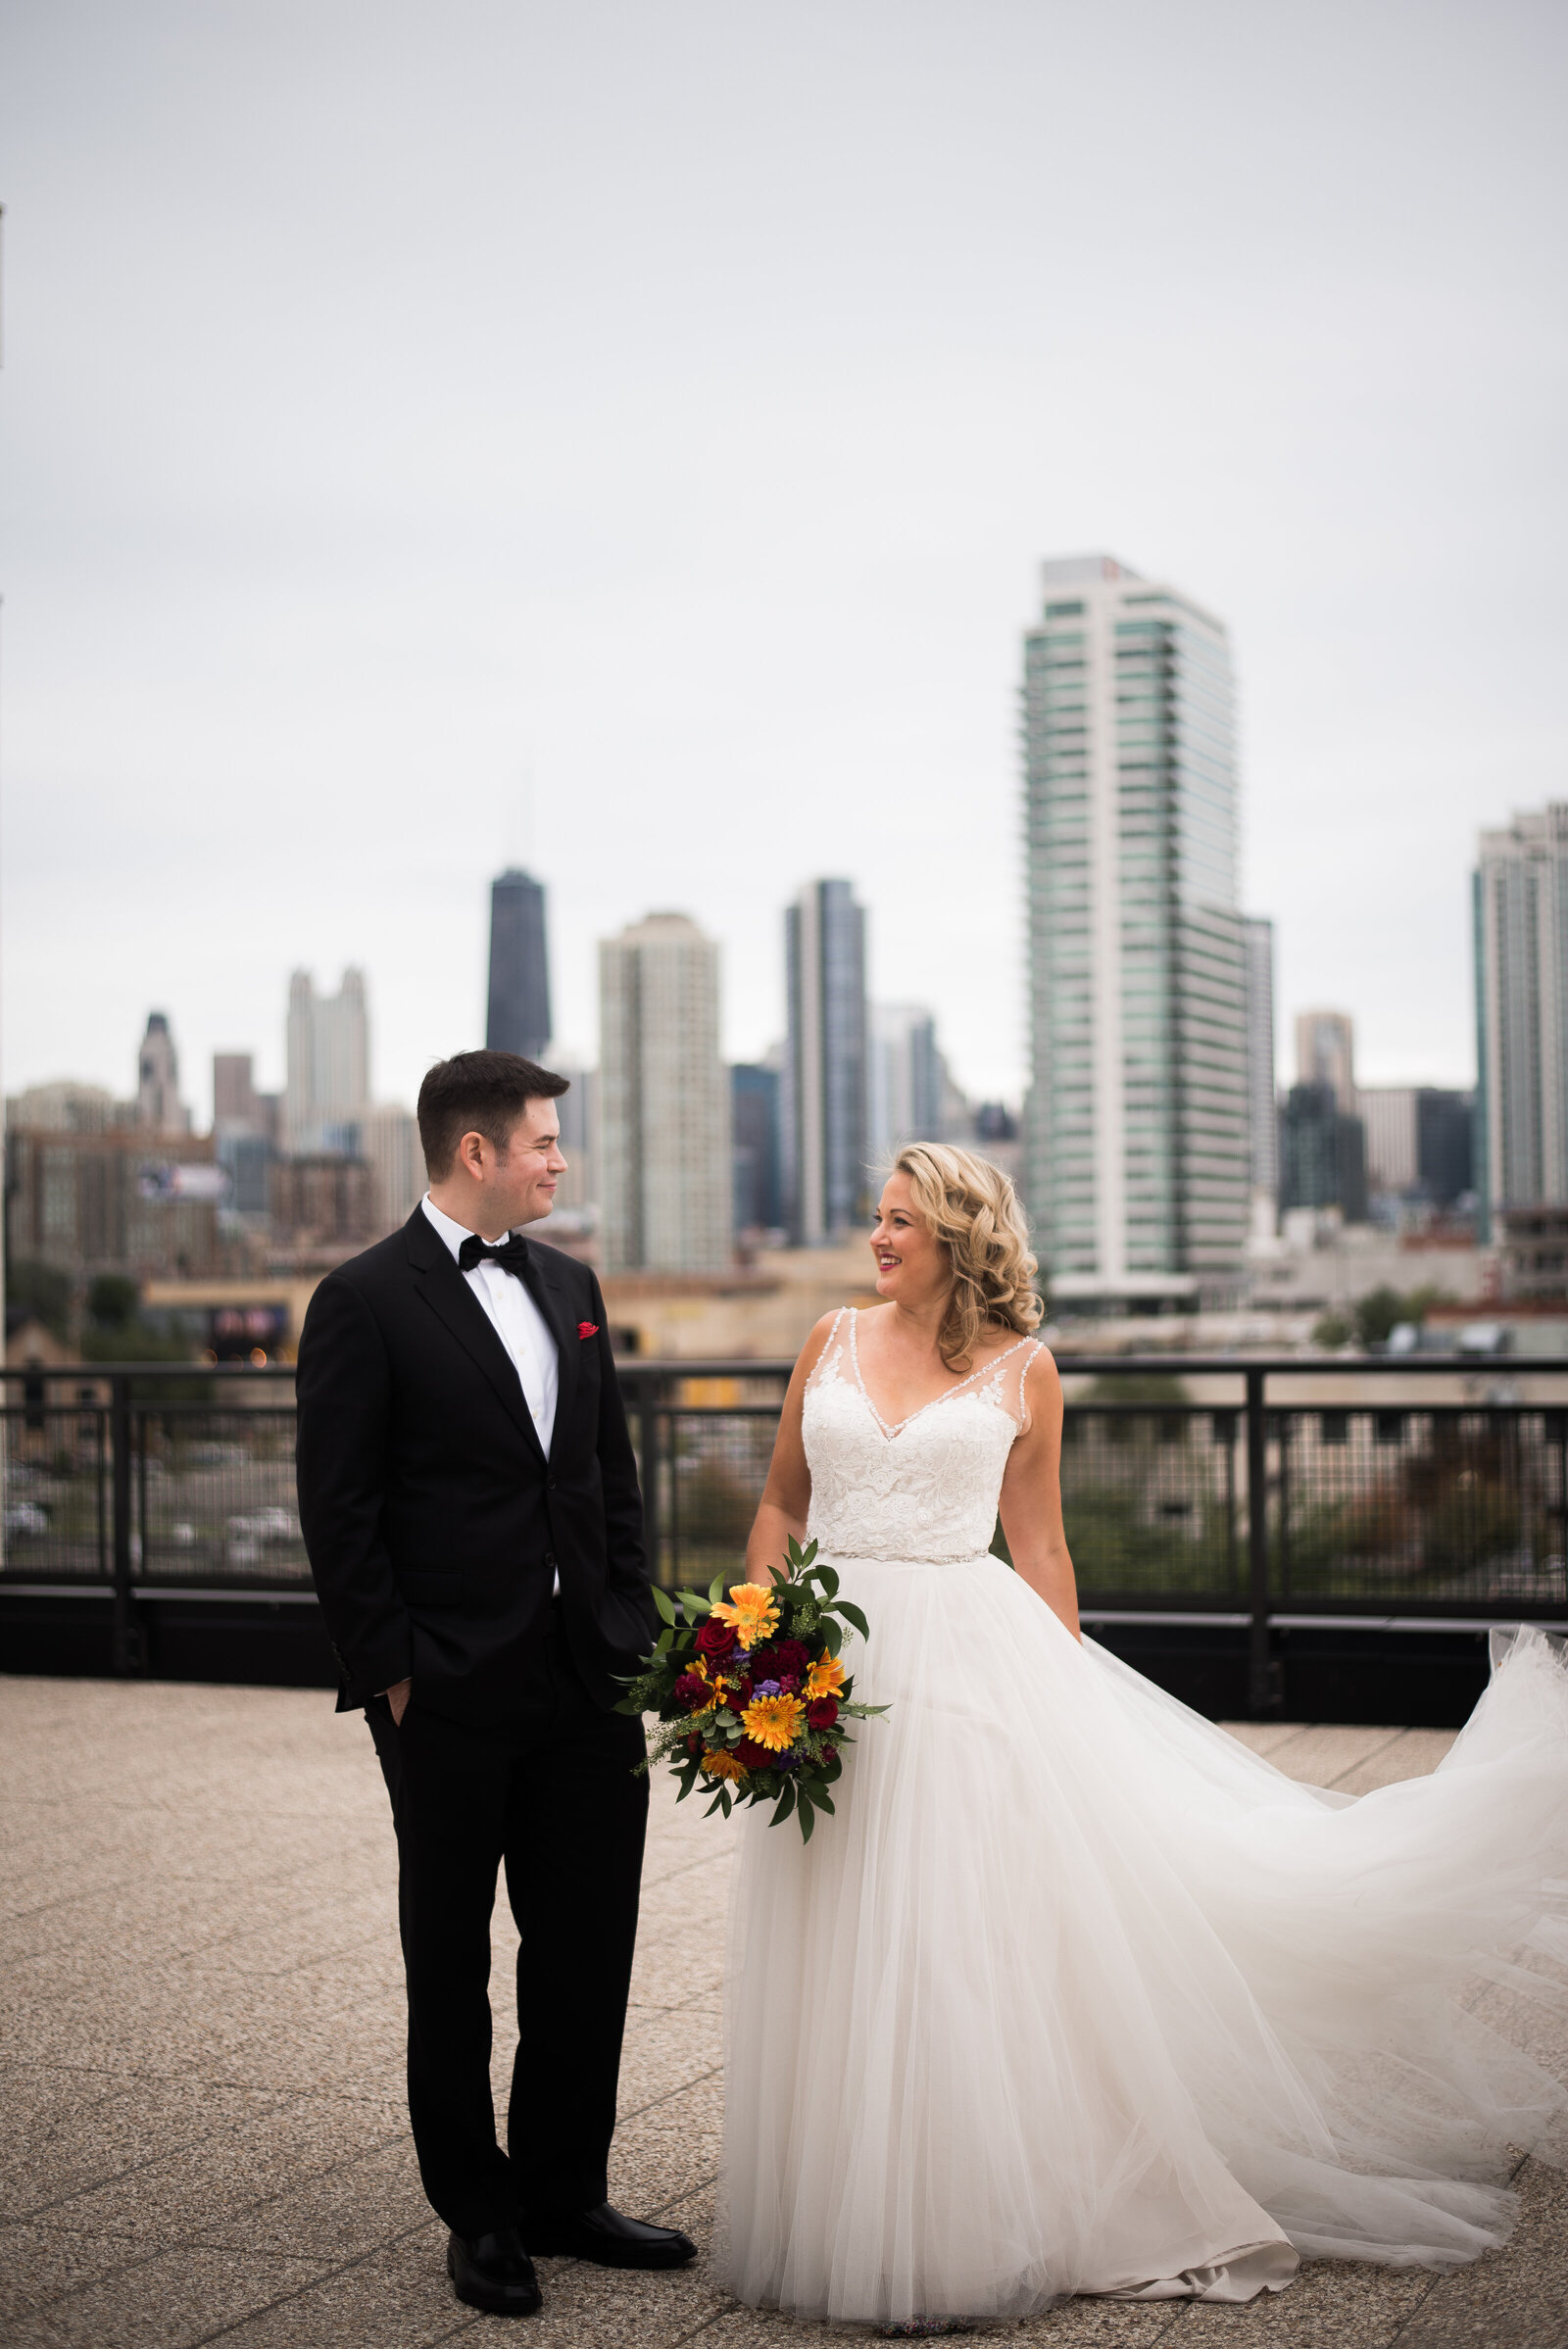 meredithdonnellyphotography-352